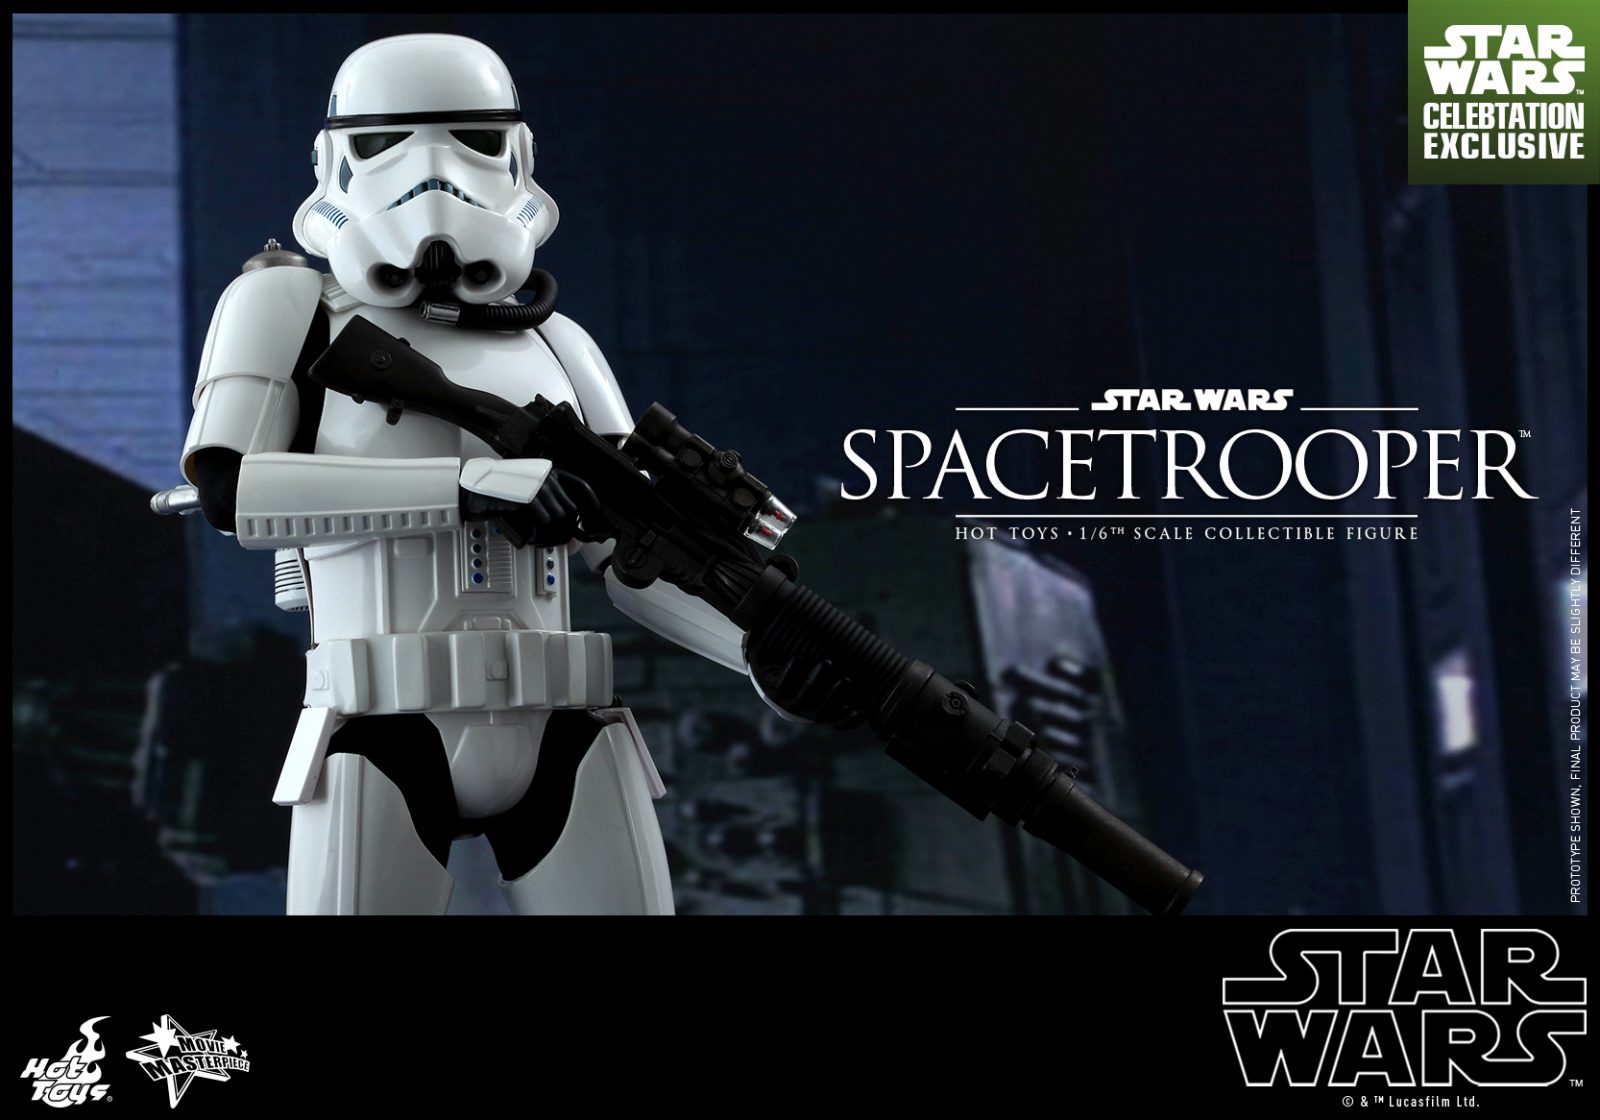 Hot Toys - Star Wars Episode IV - A New Hope - Spacetrooper Collectible Figure (Star Wars Celebration Exclusive)_PR6